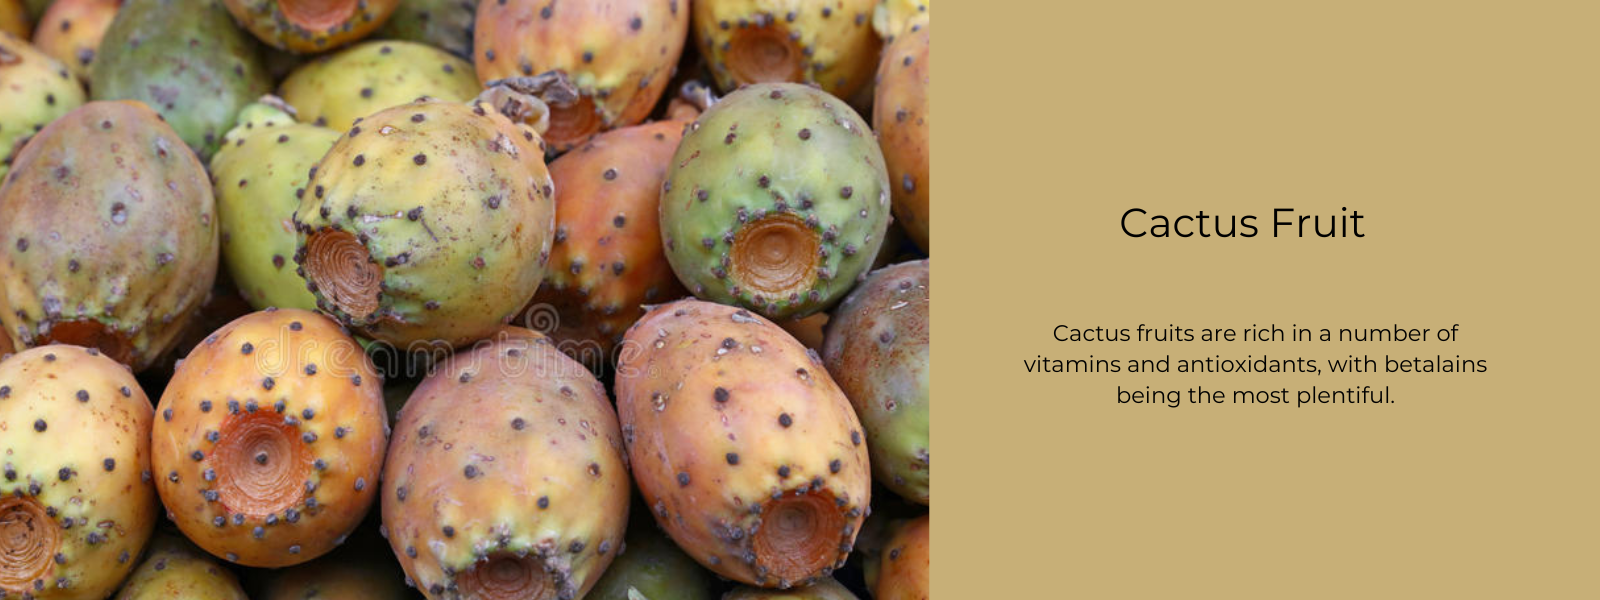 Cactus Fruit - Health Benefits, Uses and Important Facts